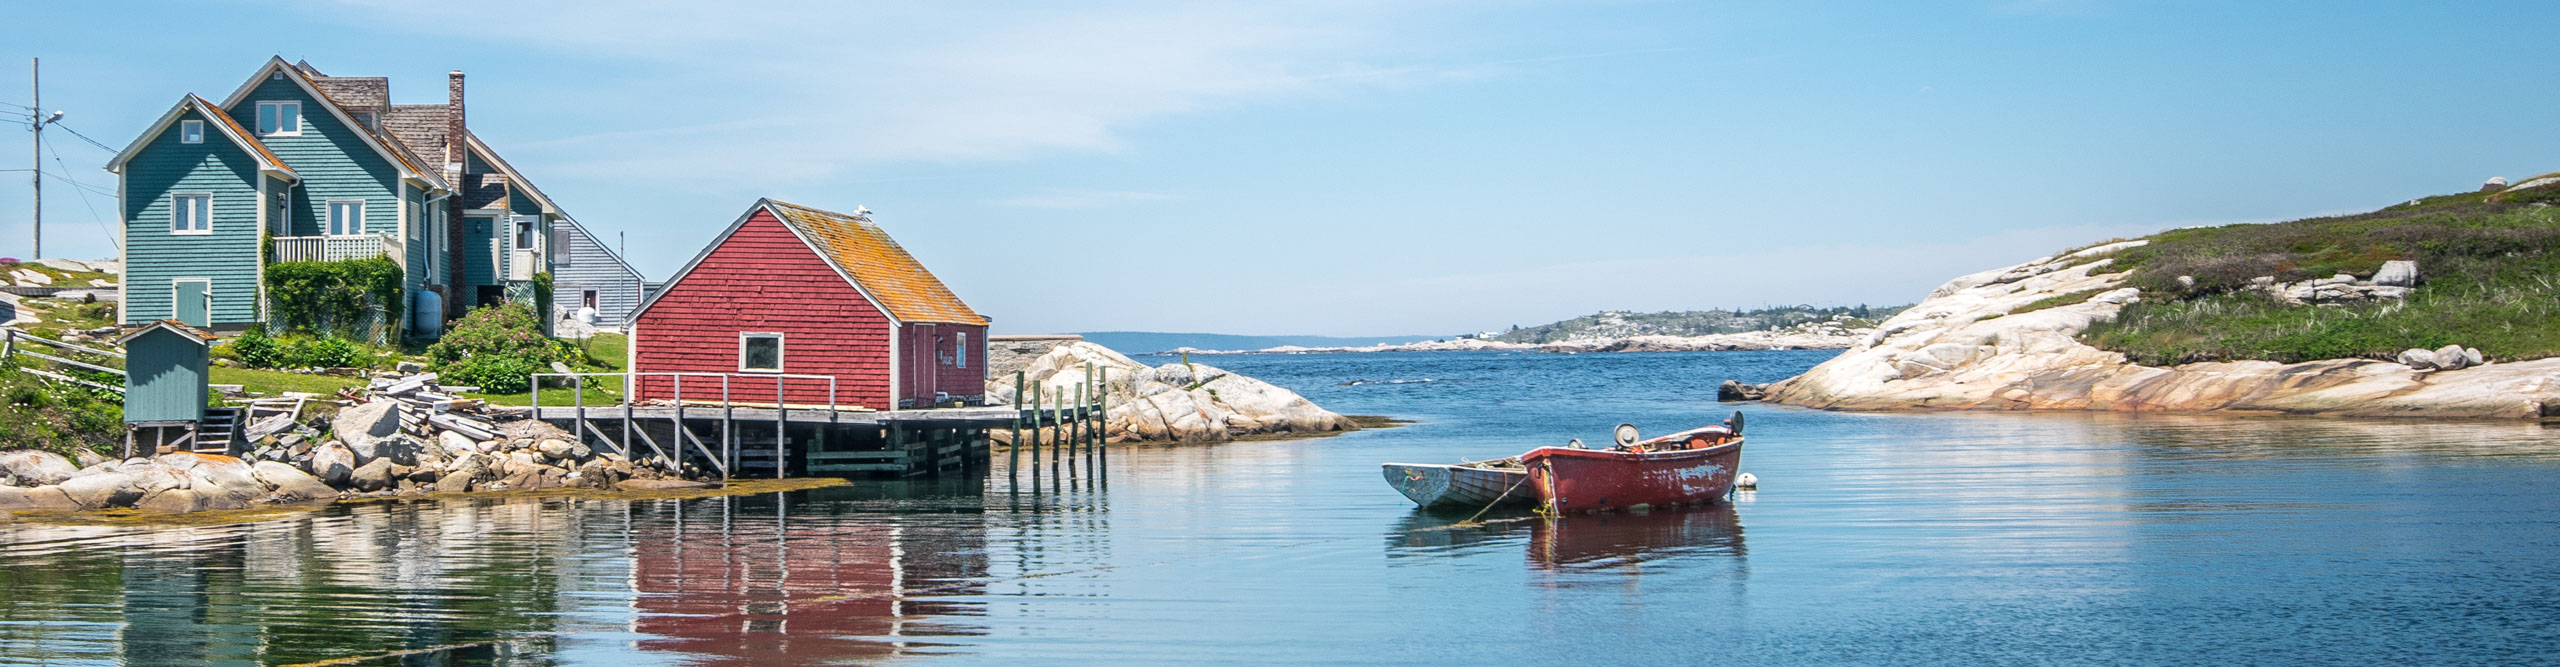 Boats in a harbour of Peggy's Cove, Nova Scotia, on a clear sunny day